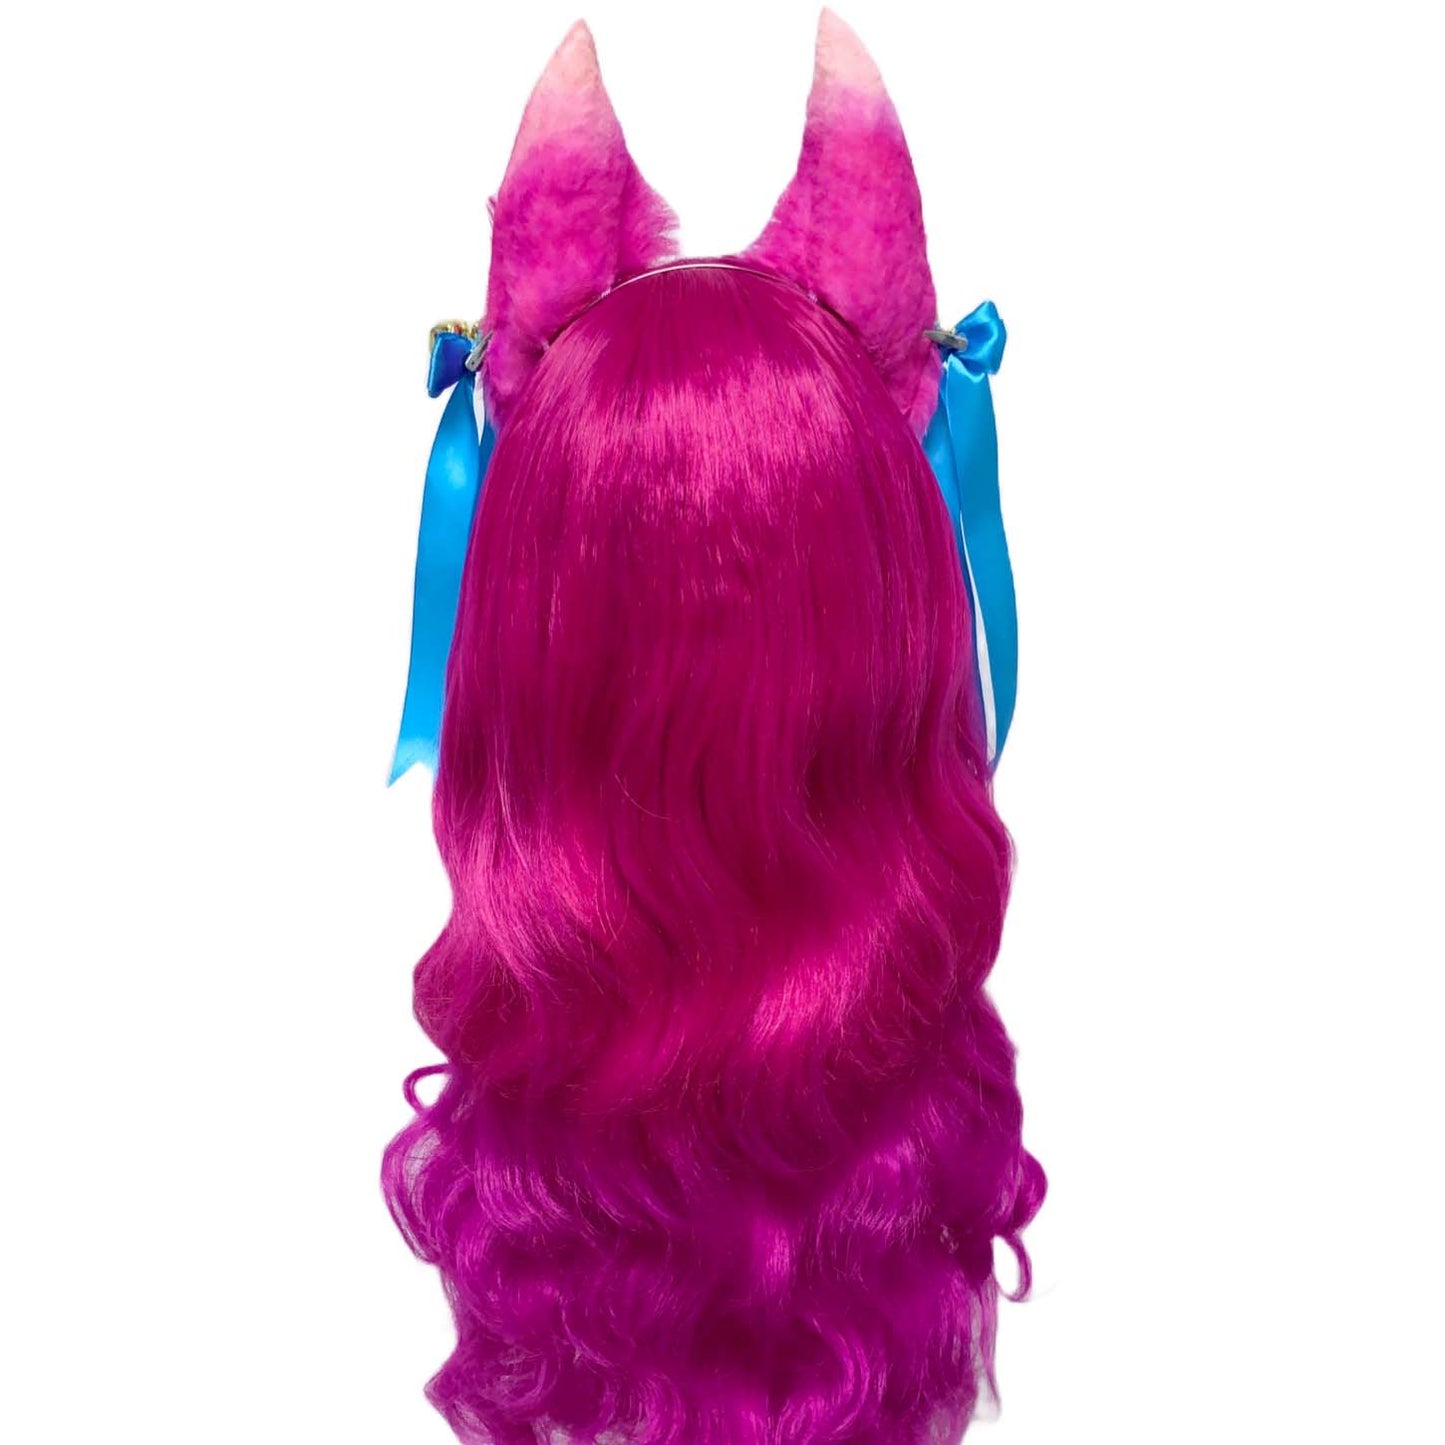 Spirit Blossom Ahri Cosplay Wig LoL Cosplay Long Gradient Pink Wig with Ears